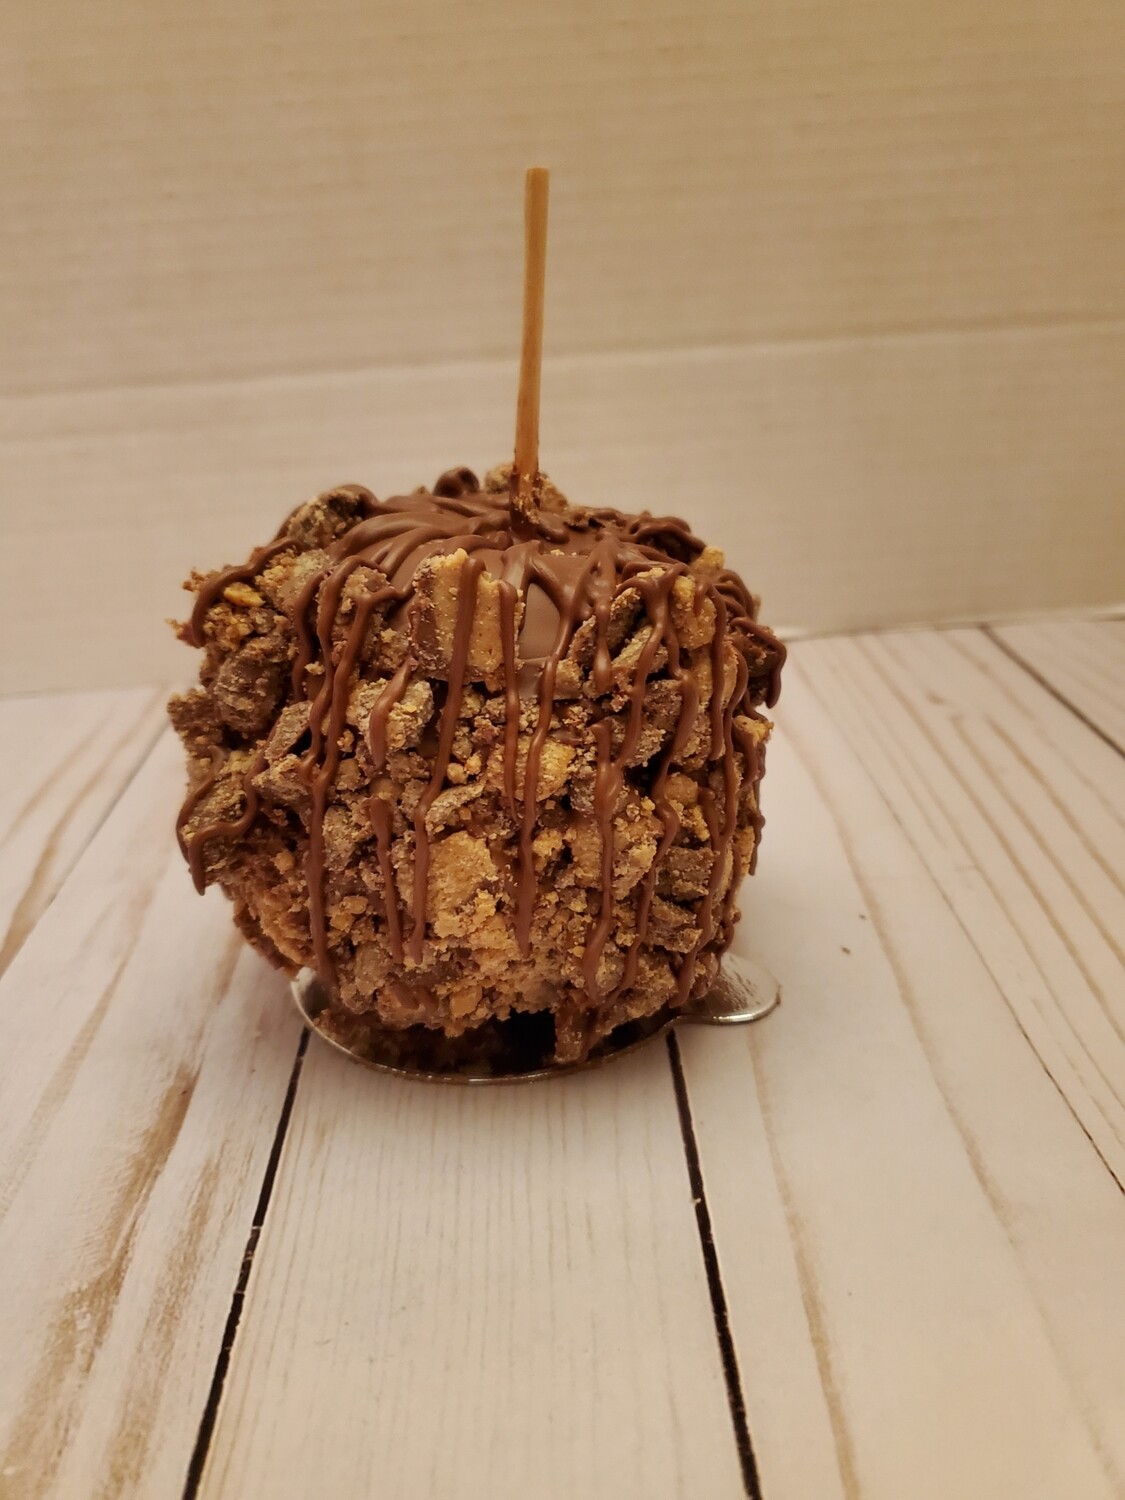 Reeses Peanut Butter Cup Chocolate and Caramel Apple